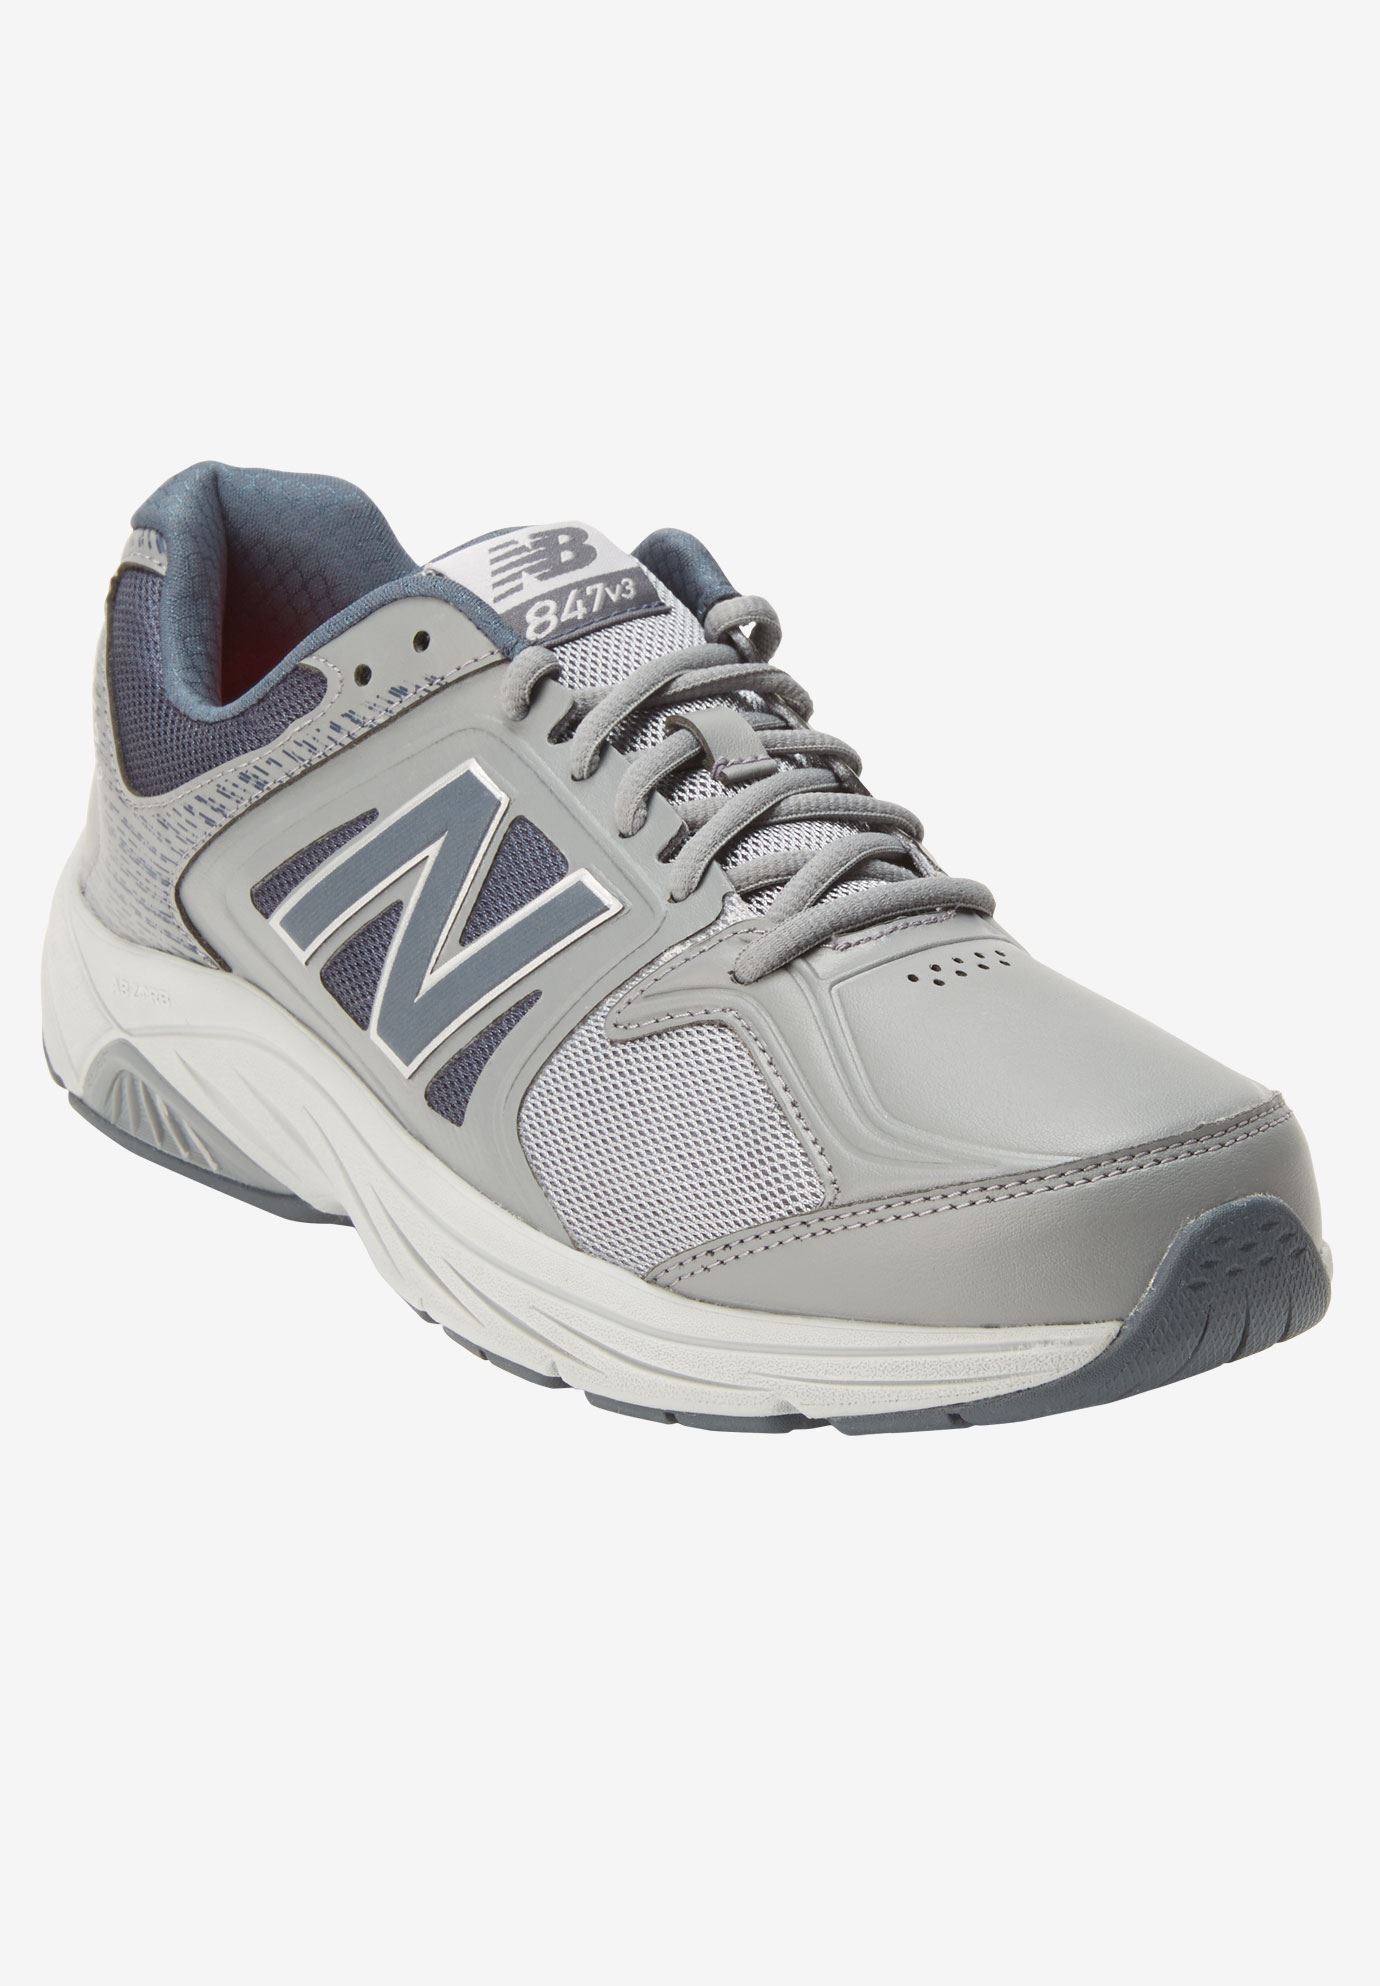 New Balance® 847v3 Walking Shoe| Big and Tall Casual Shoes | King Size